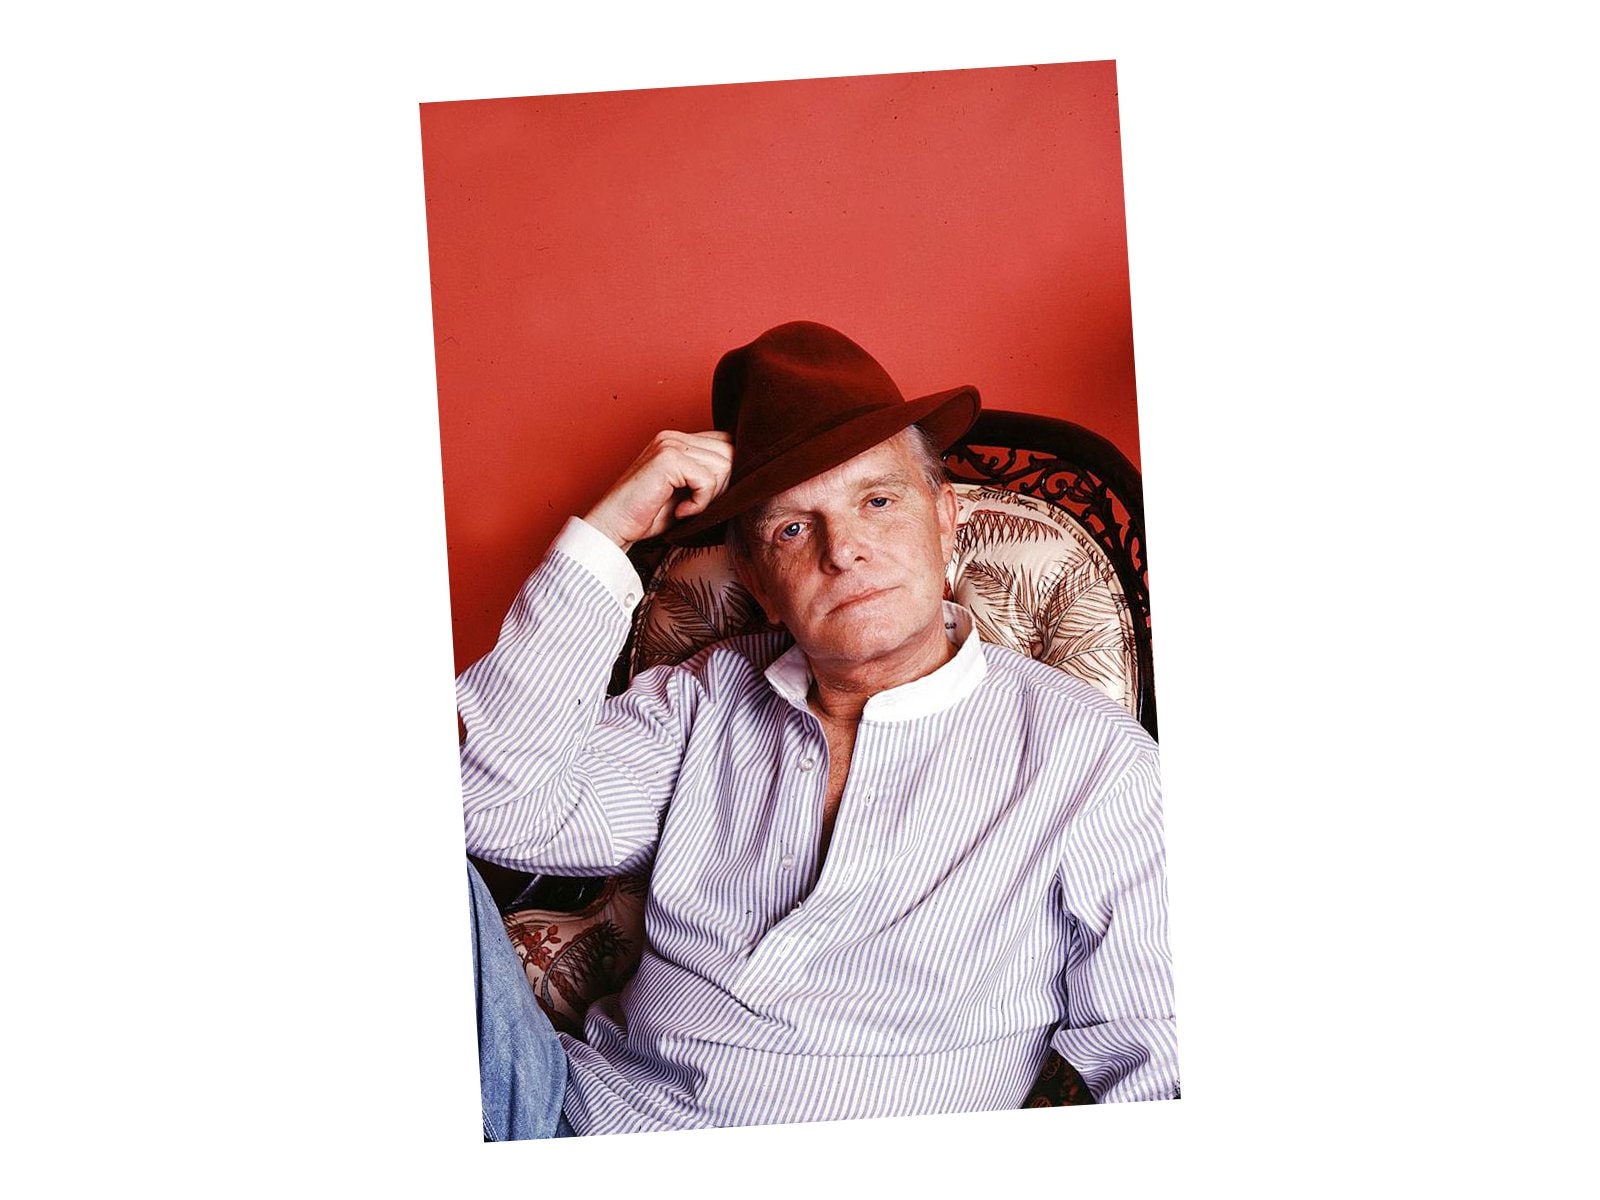 Truman Capote wearing trilby hat and striped blue and white top sitting in a chair